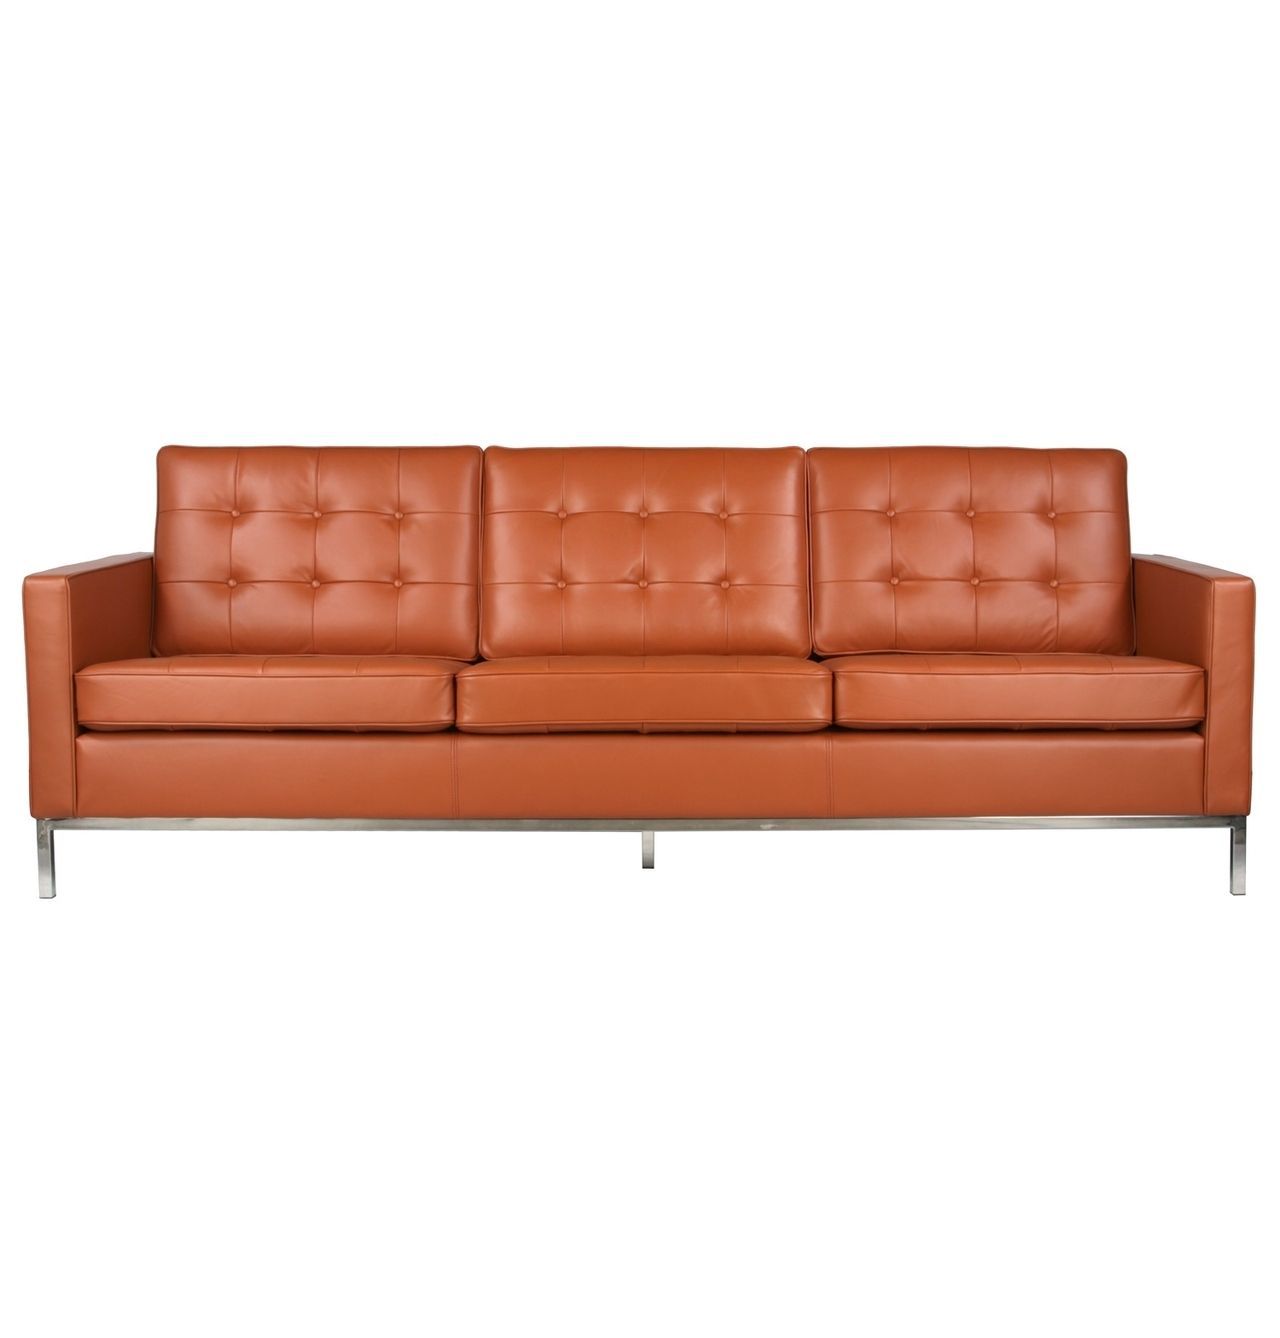 Replica Florence Knoll Aniline Leather 3 Seater Sofa For Florence Knoll 3 Seater Sofas (Photo 1 of 15)